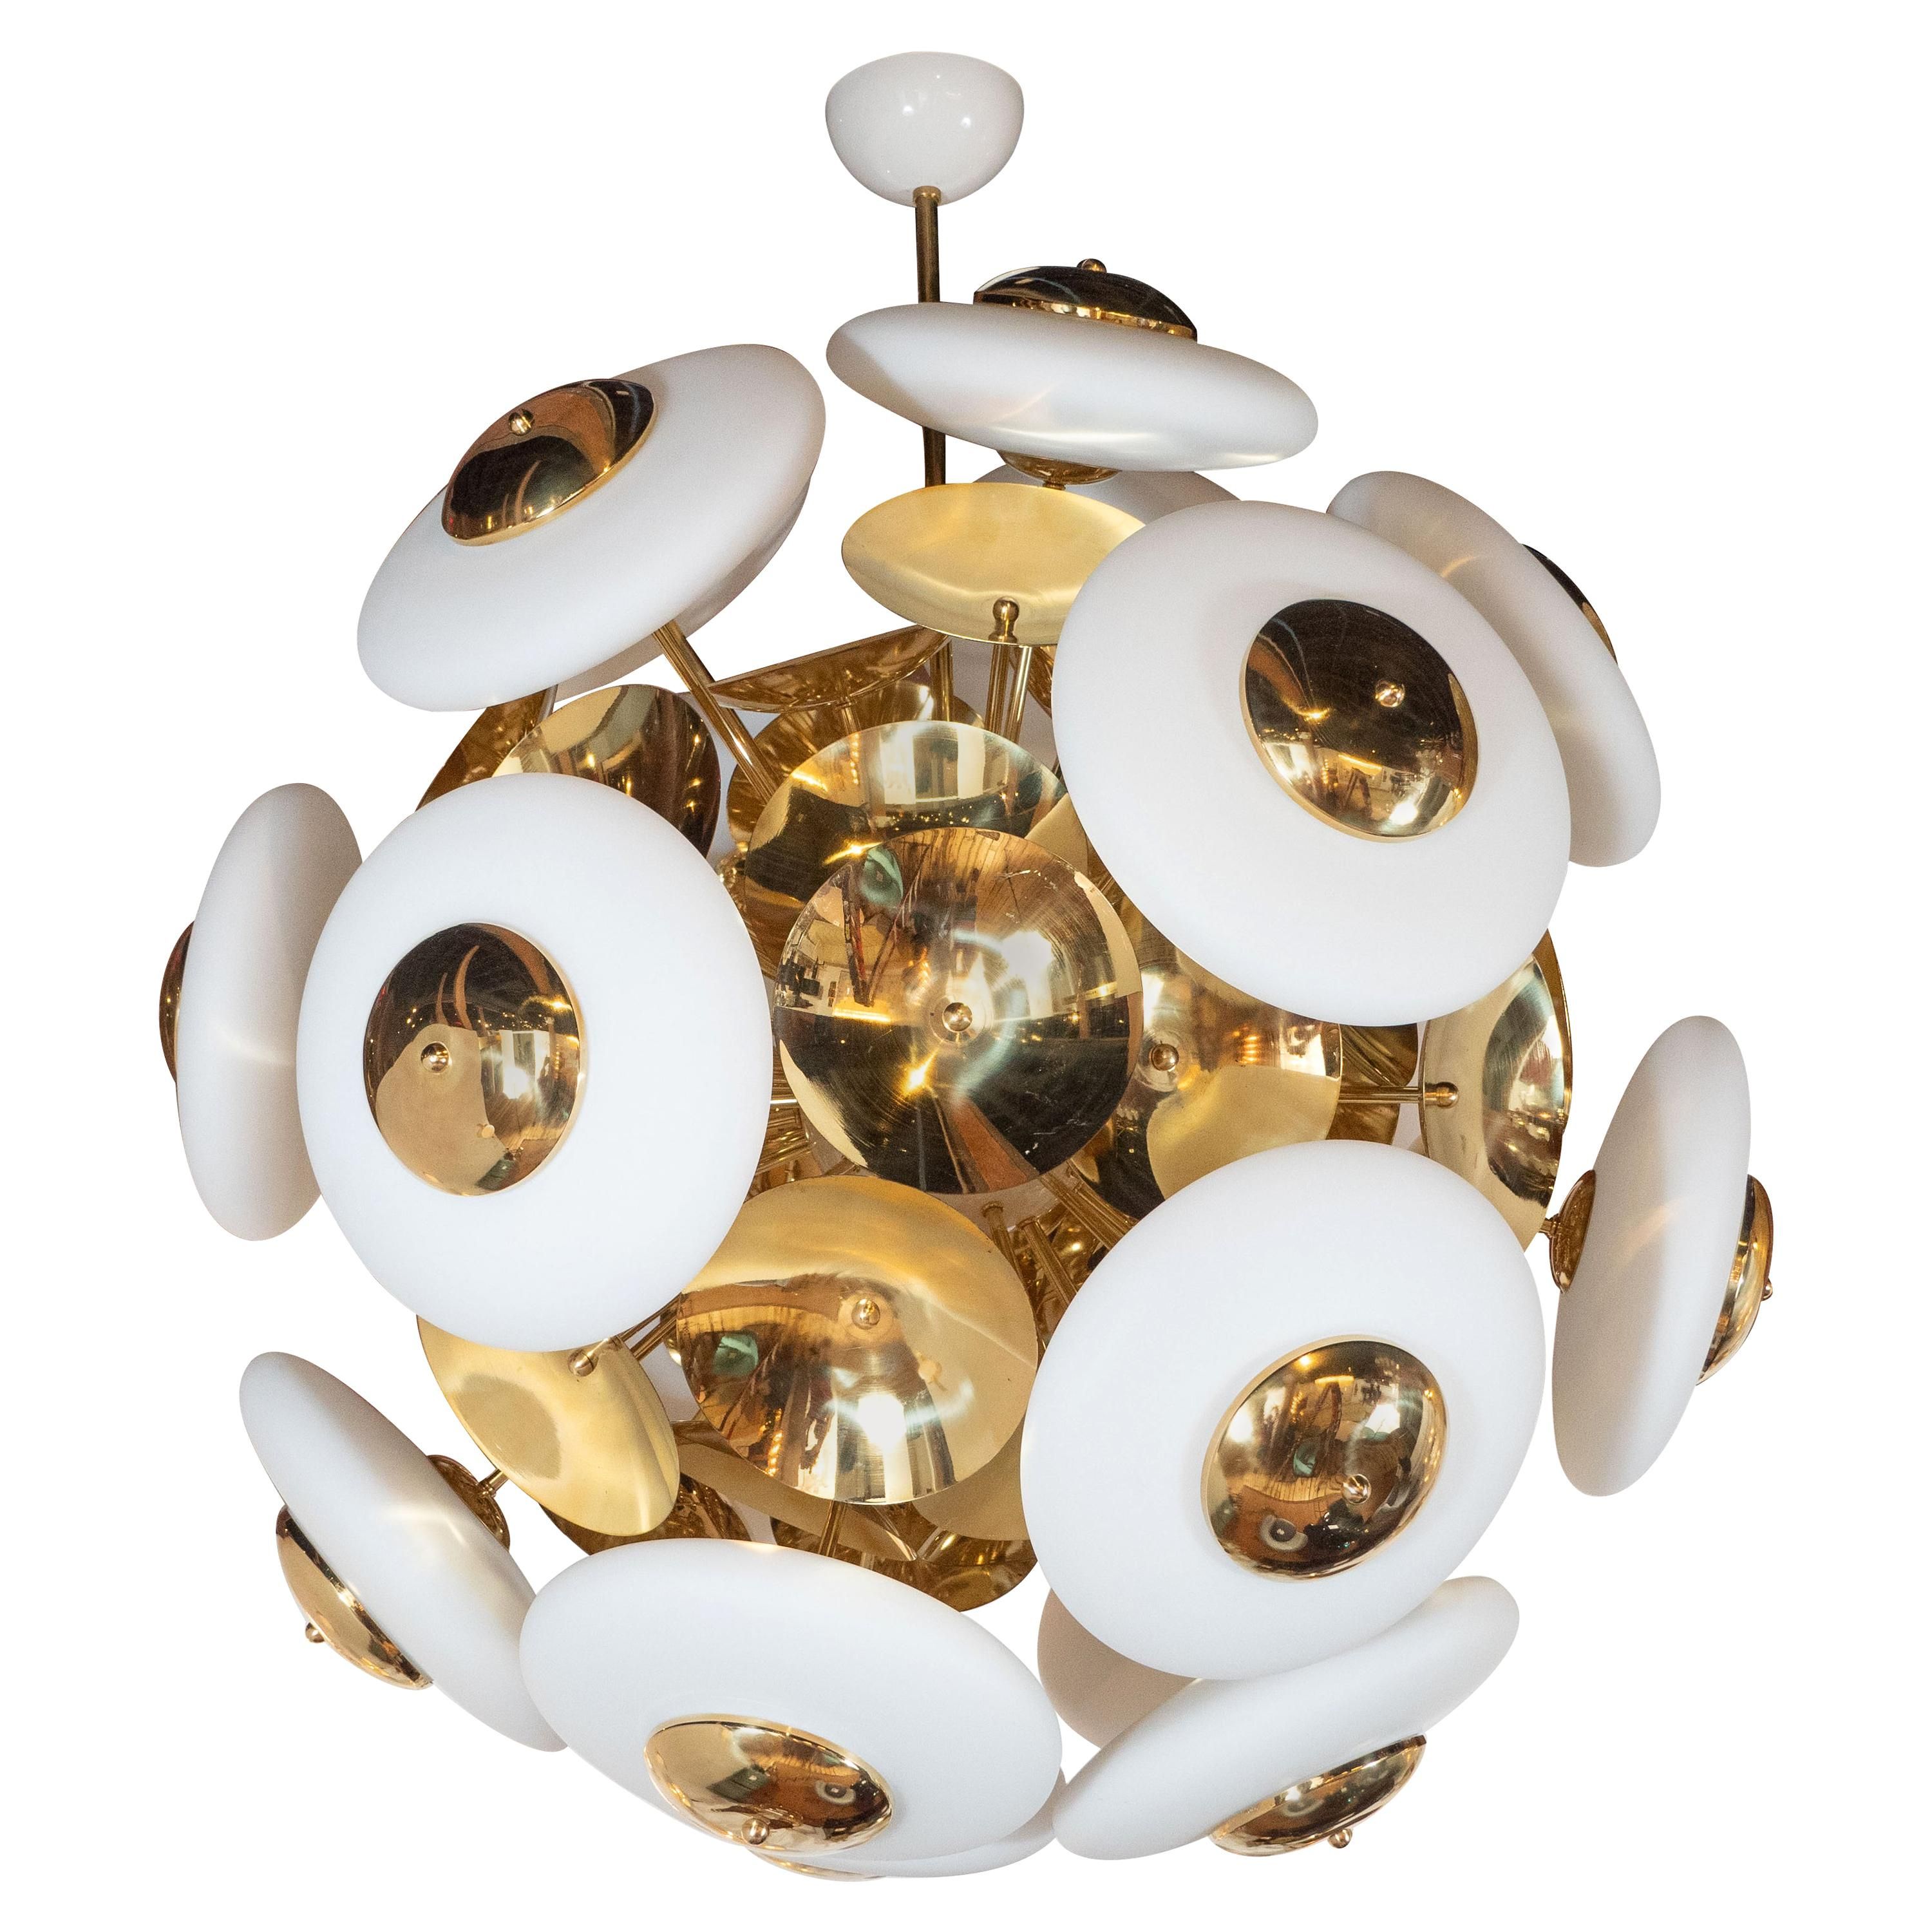 Large Glass Pendant Lights – 523 For Sale On 1stdibs Within Corona 12 Light Sputnik Chandeliers (View 19 of 30)